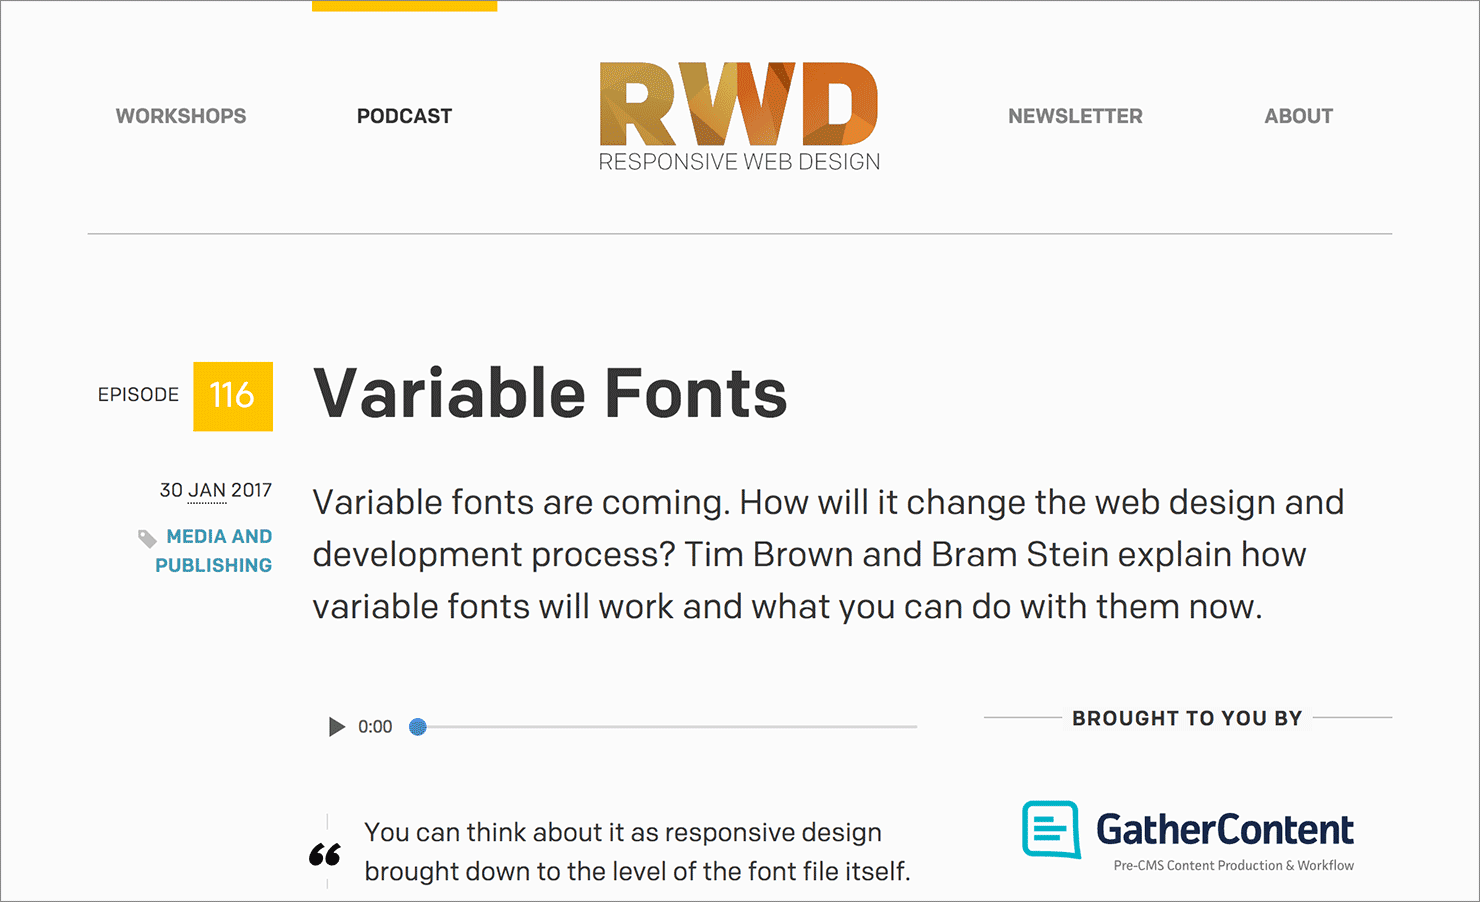 Variable Fonts on the Responsive Web Design podcast